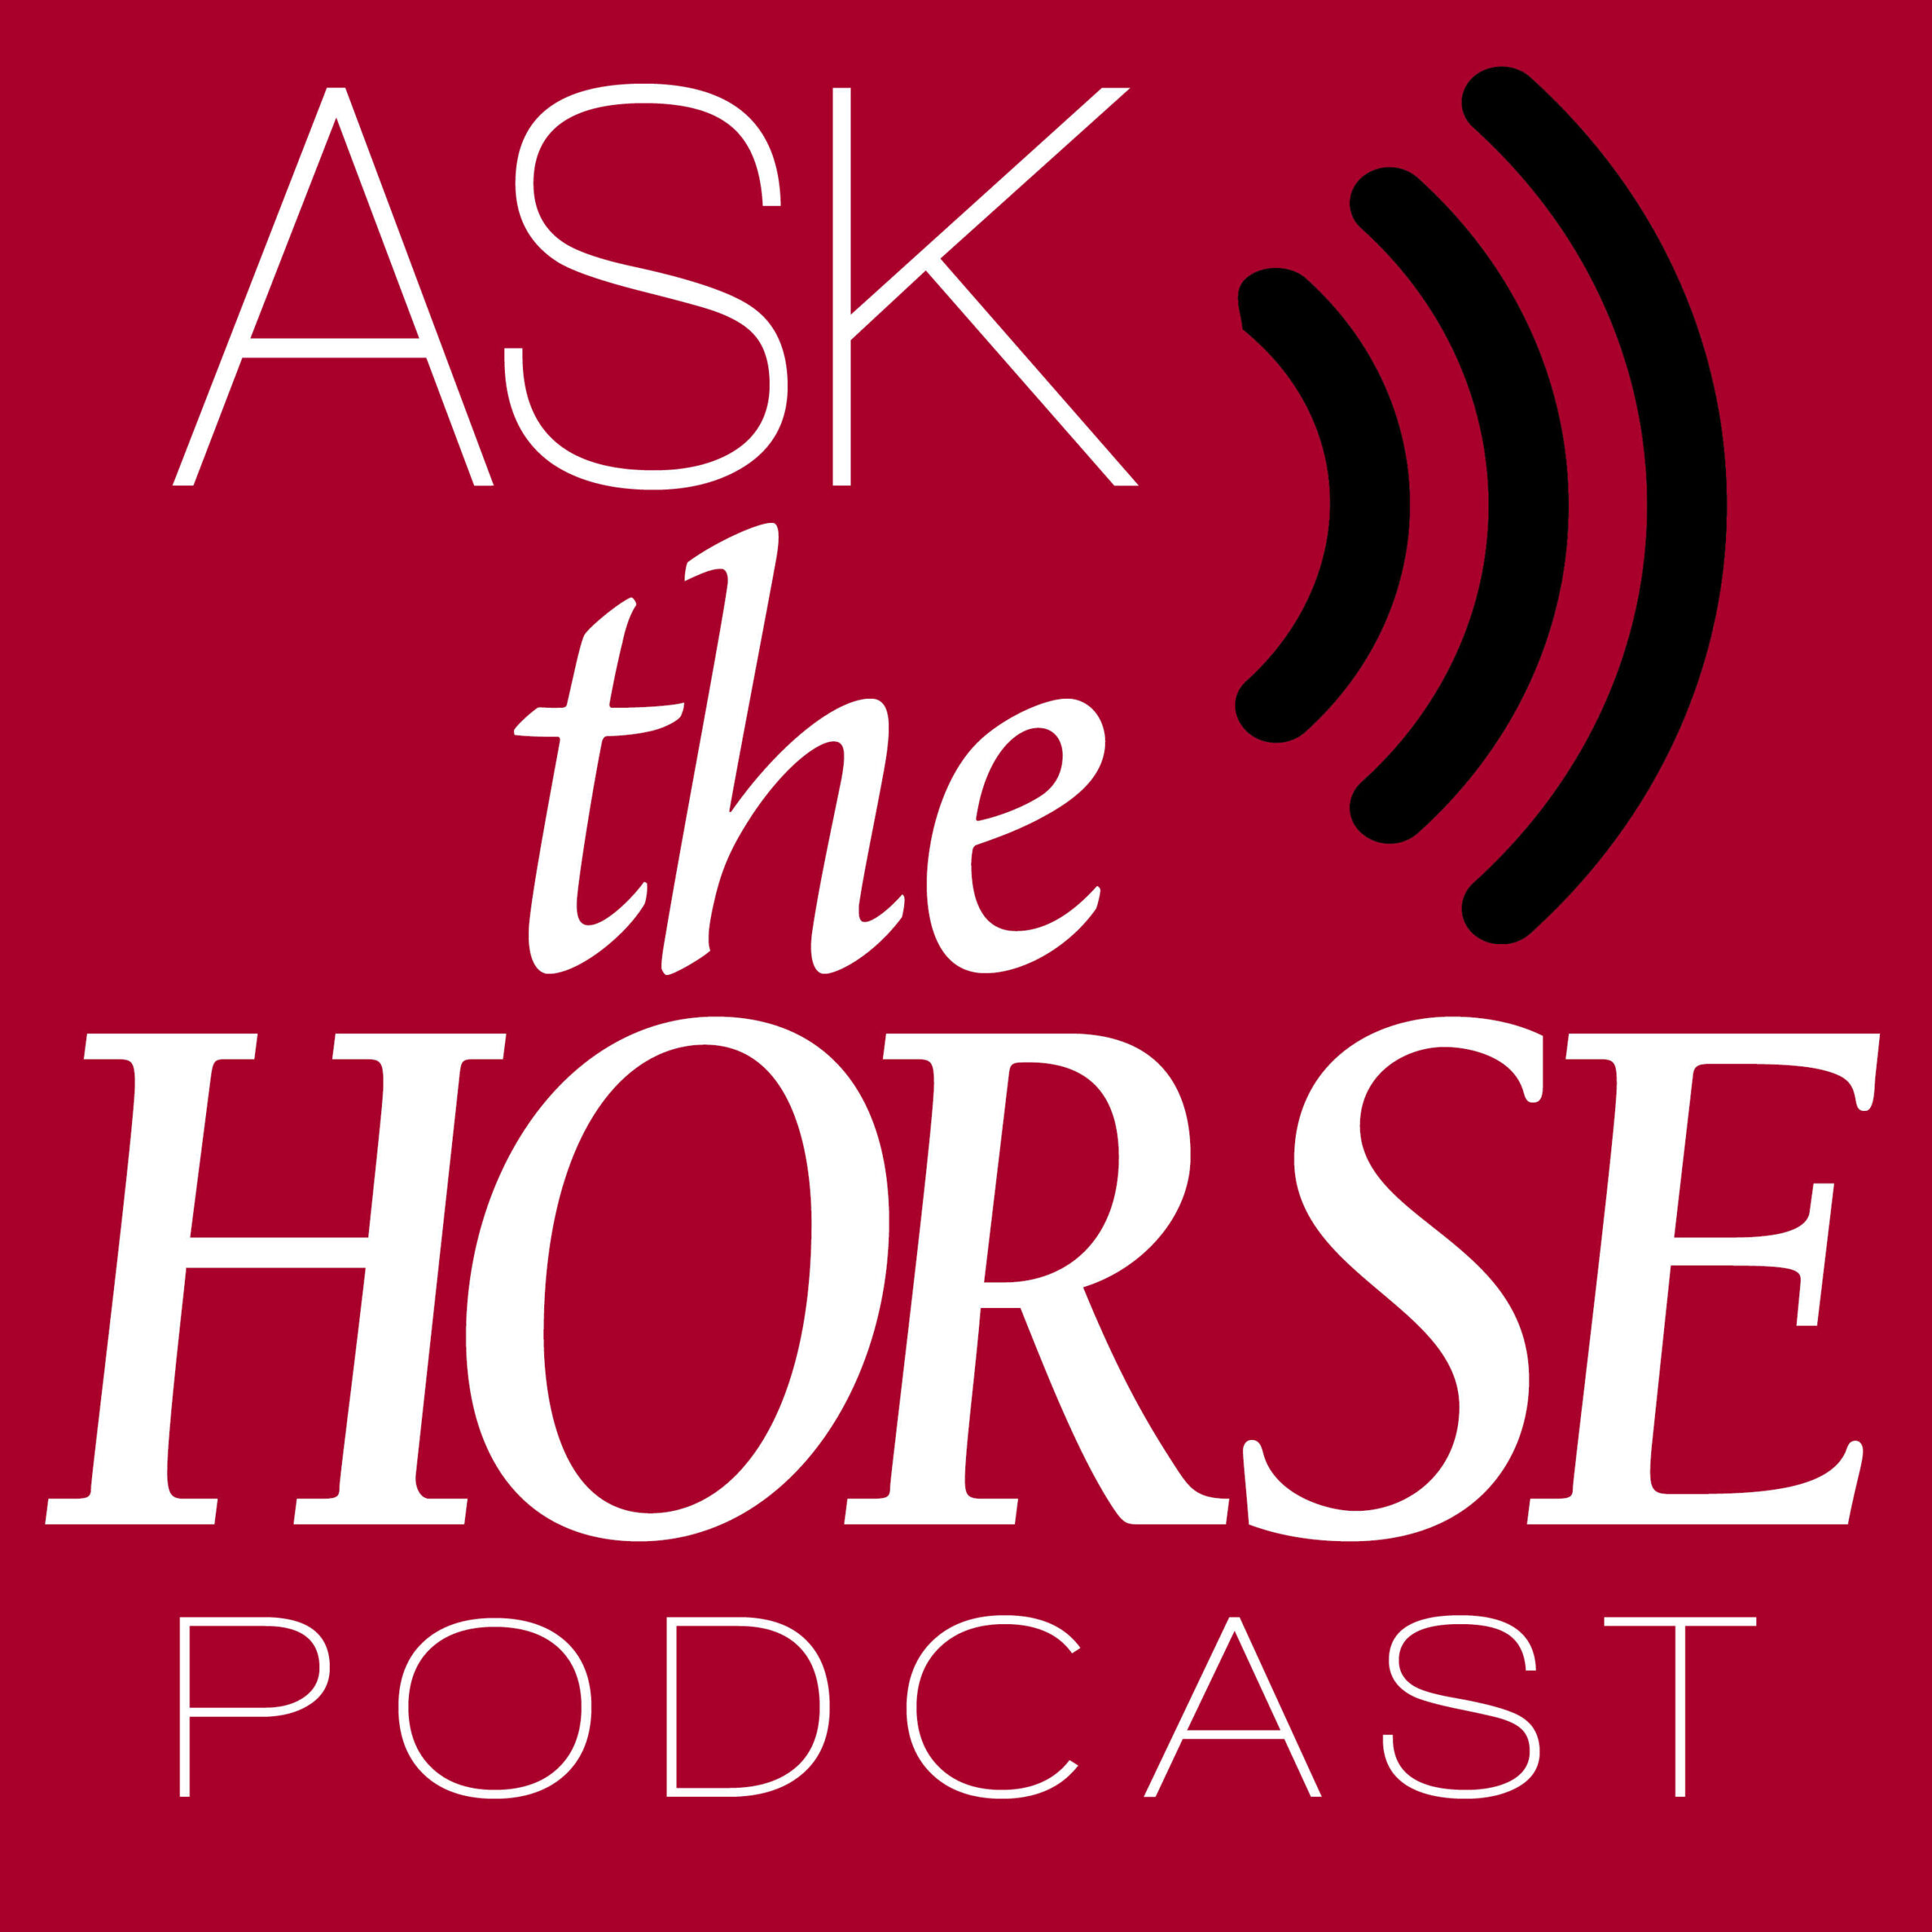 Ask the TheHorse